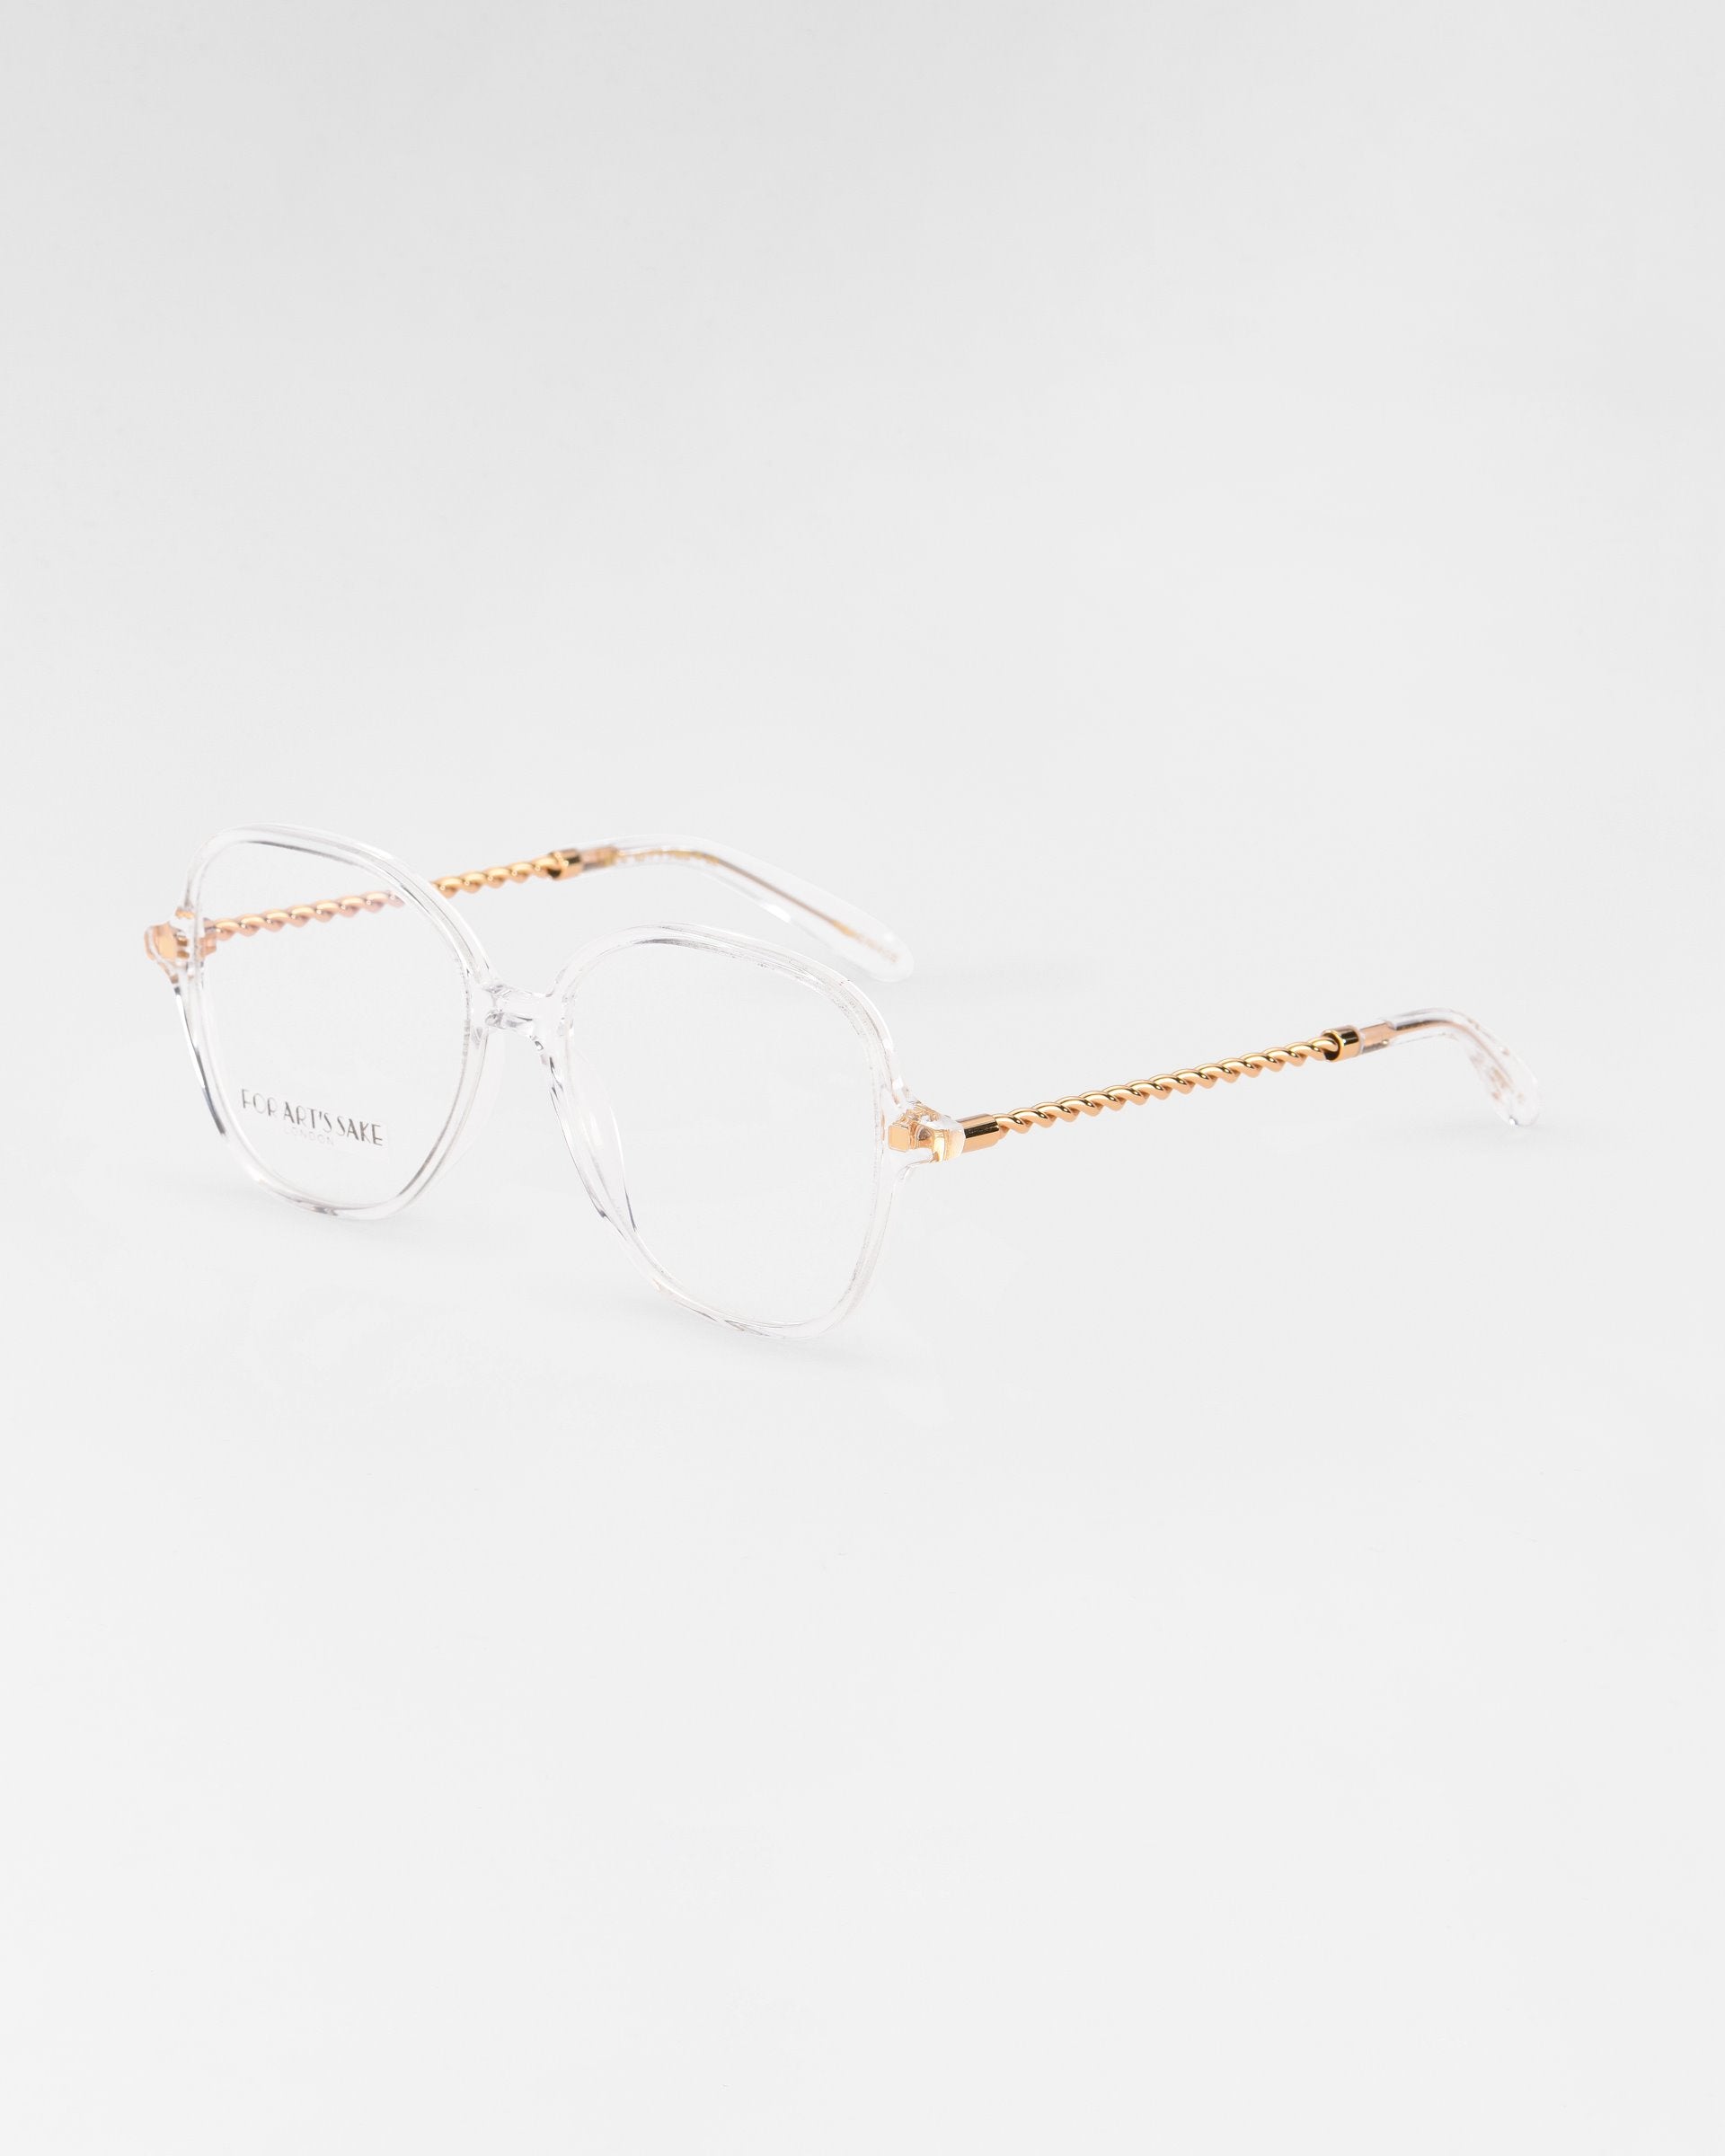 A pair of transparent Dumpling eyeglasses with hexagonal frames and golden, beaded temples by For Art&#39;s Sake®. The lenses are large and slightly oversized, offering a modern and stylish look with the added benefit of a blue light filter. The background is plain white, highlighting the glasses&#39; design details.